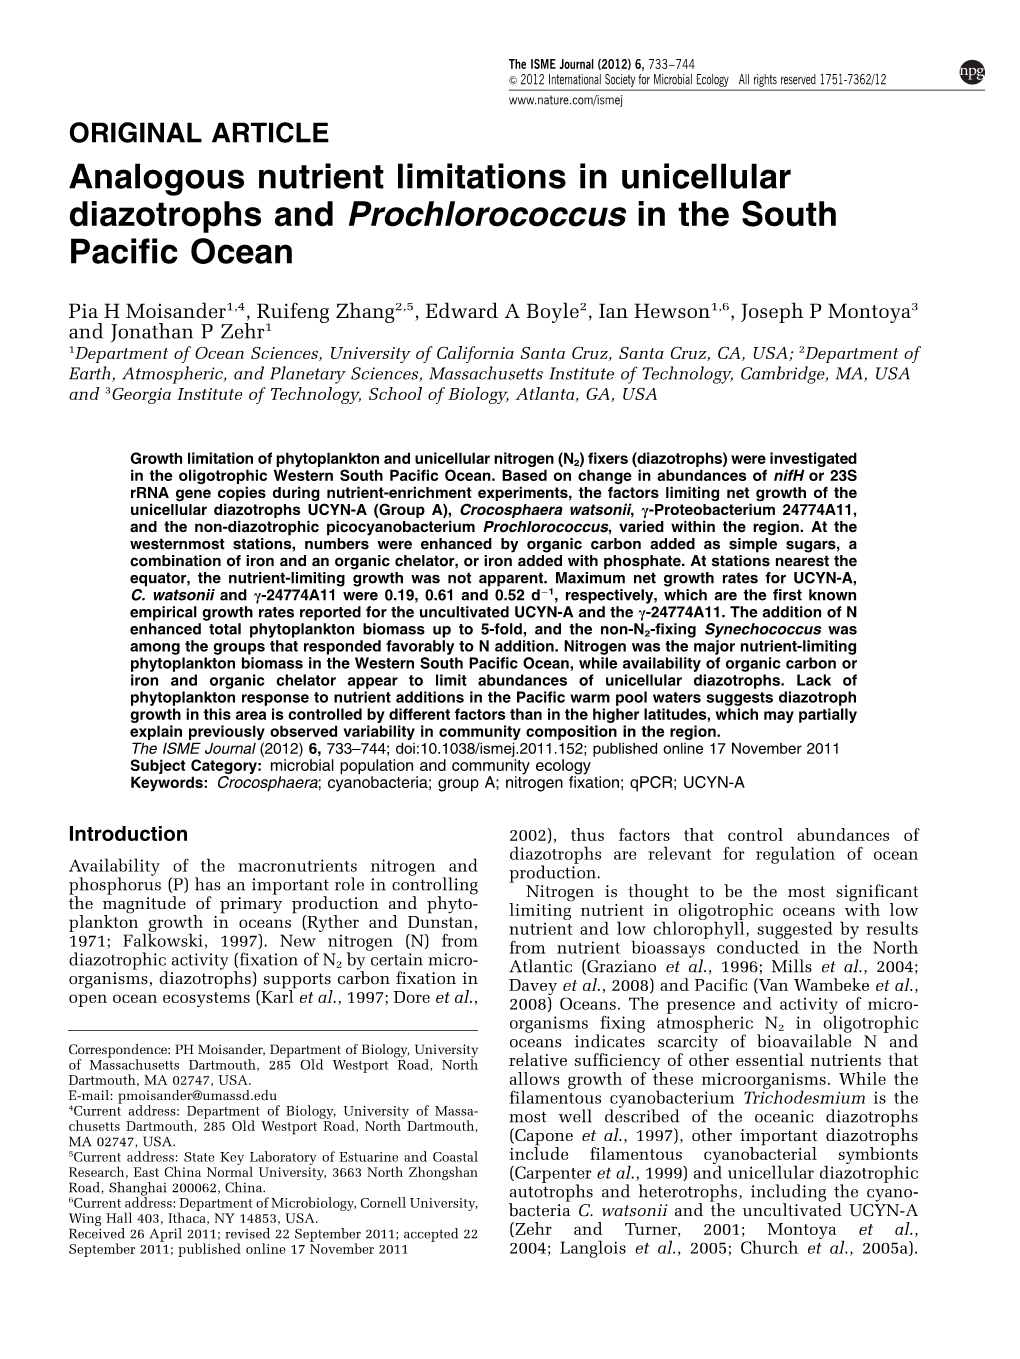 Analogous Nutrient Limitations in Unicellular Diazotrophs and Prochlorococcus in the South Pacific Ocean